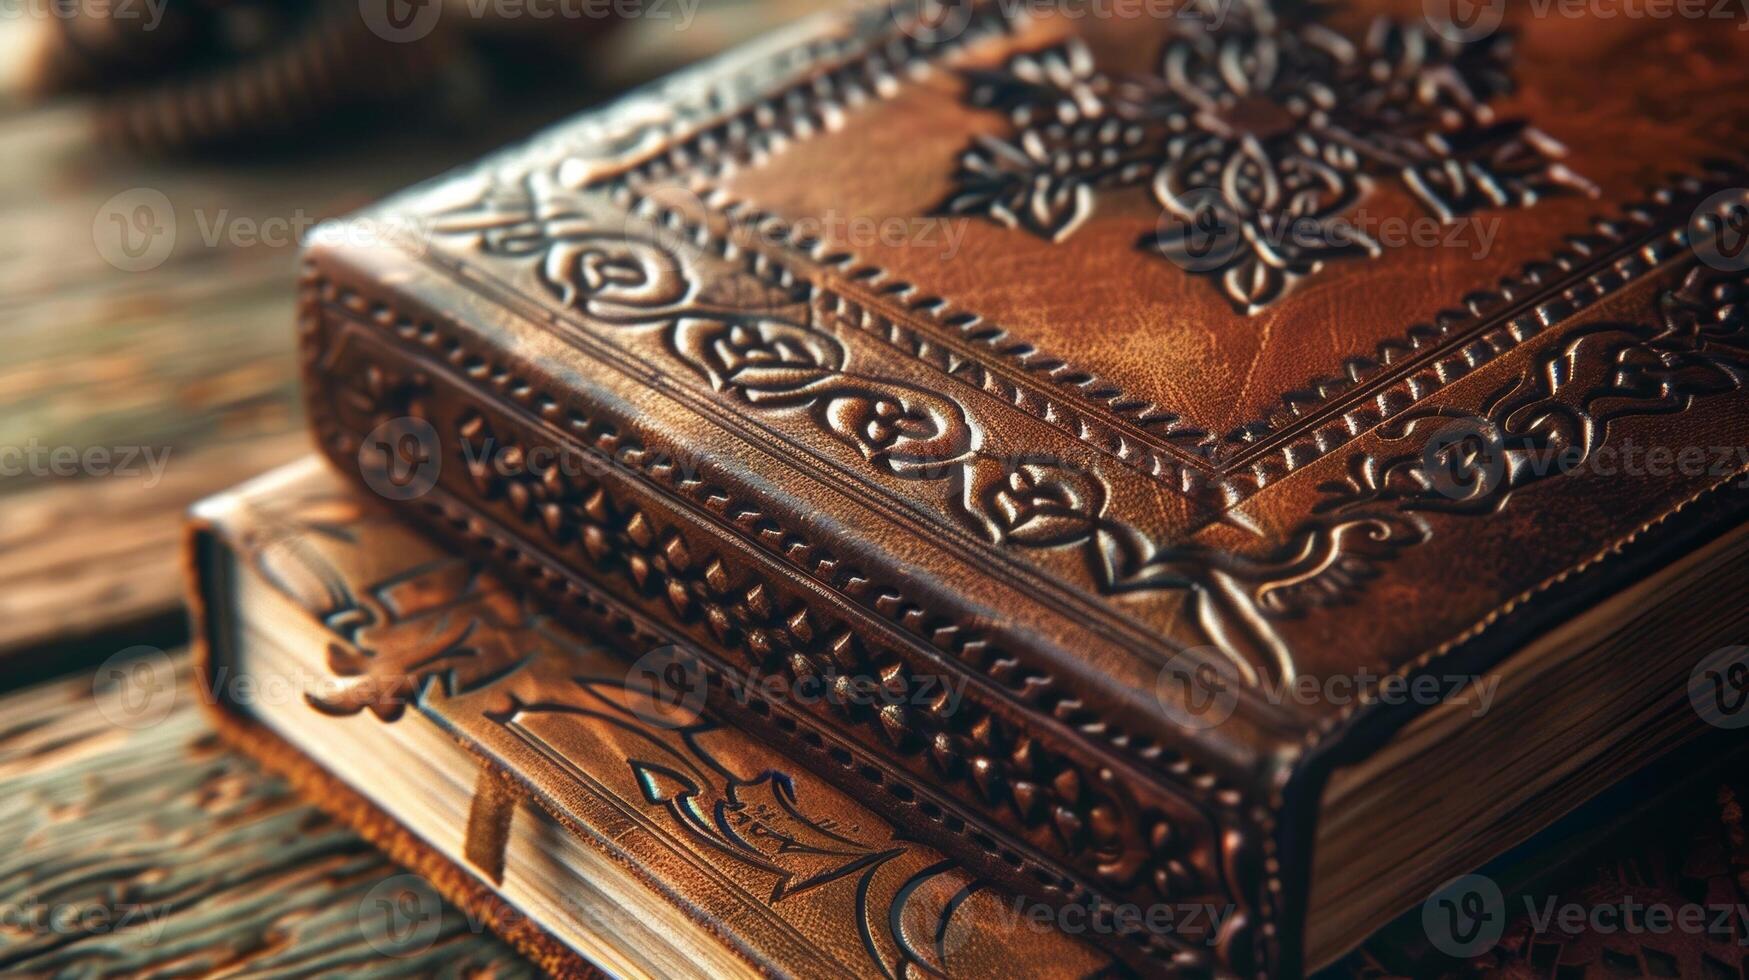 A leather journal with intricate designs engraved on its cover a reflection of the quiet moments its owner spent crafting it photo